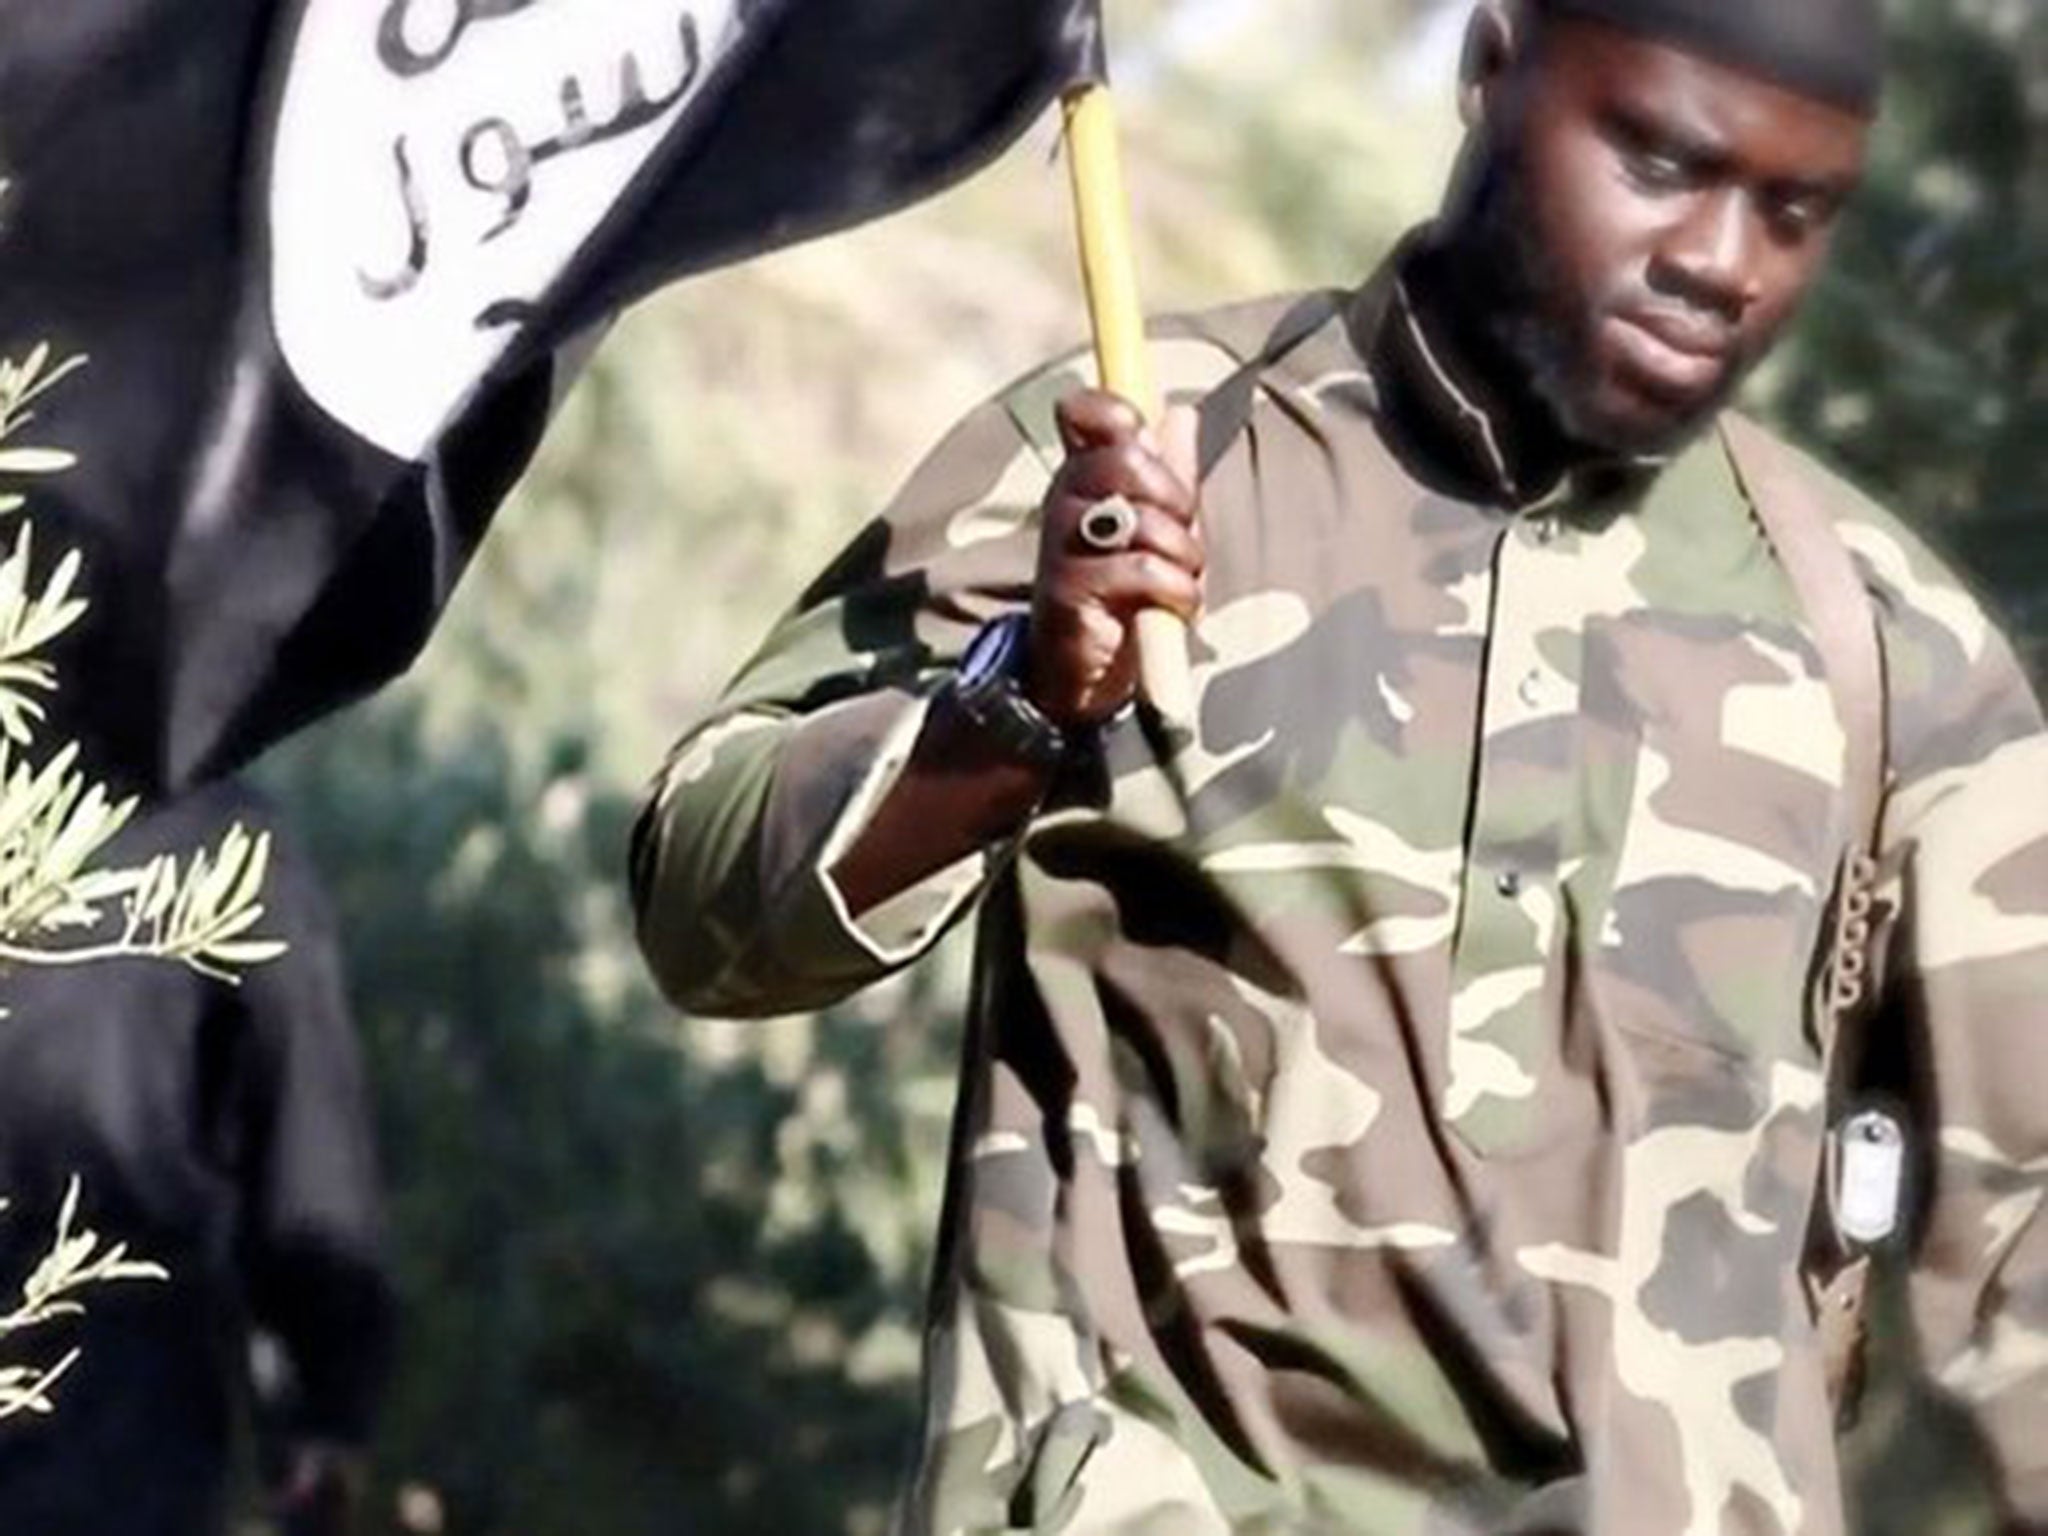 Harry Sarfo's appearance in an Isis propaganda video issued in August 2015